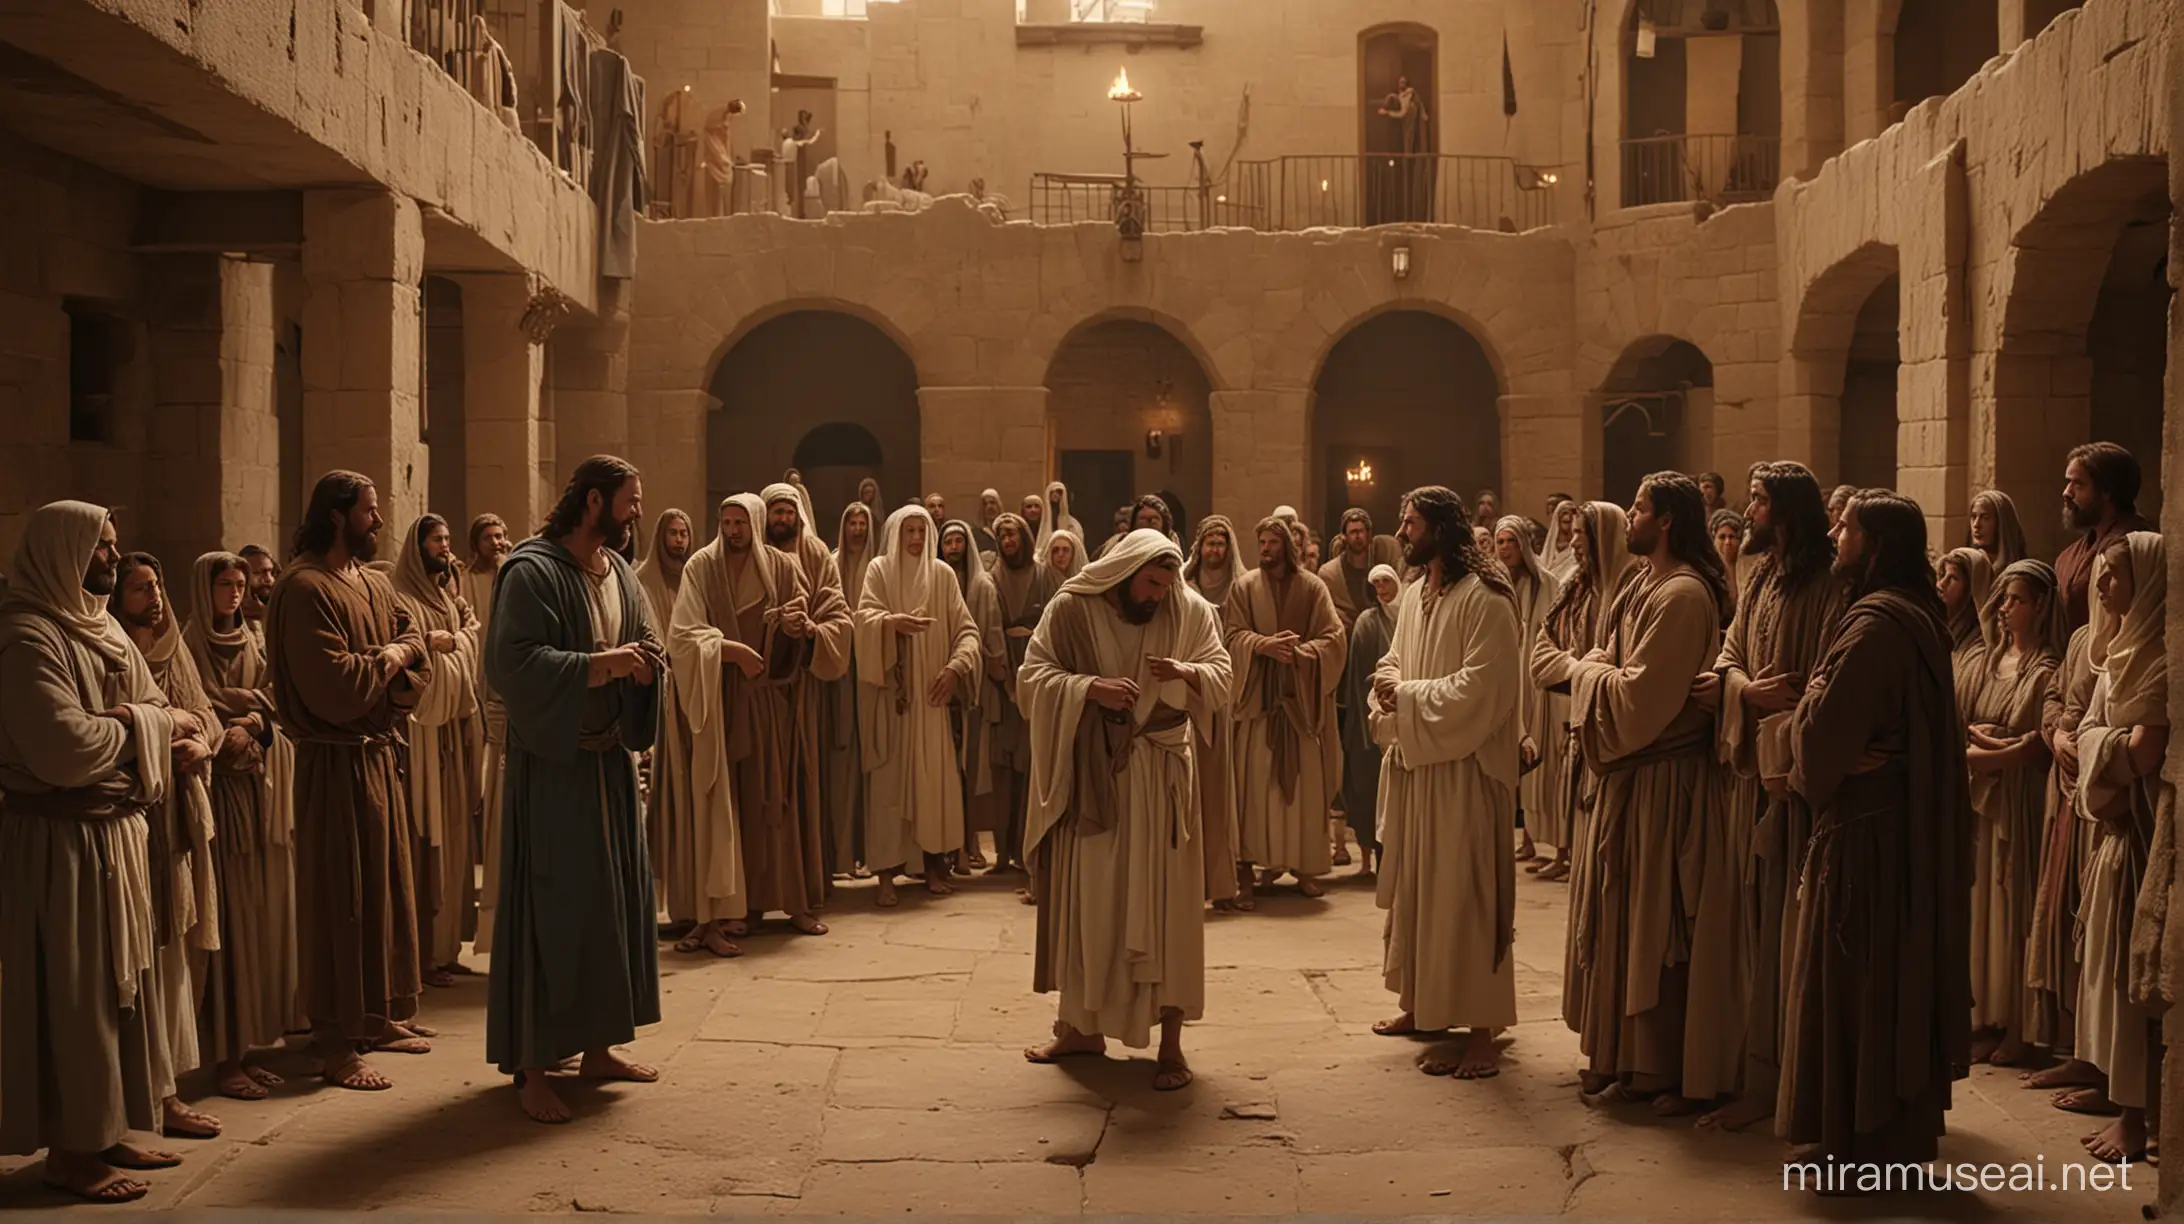 create an image of Jesus in a 1st century Nazareth house, gathered with his followers. 6k resolution, more realistic, based on the movie The Passion of the Christ.